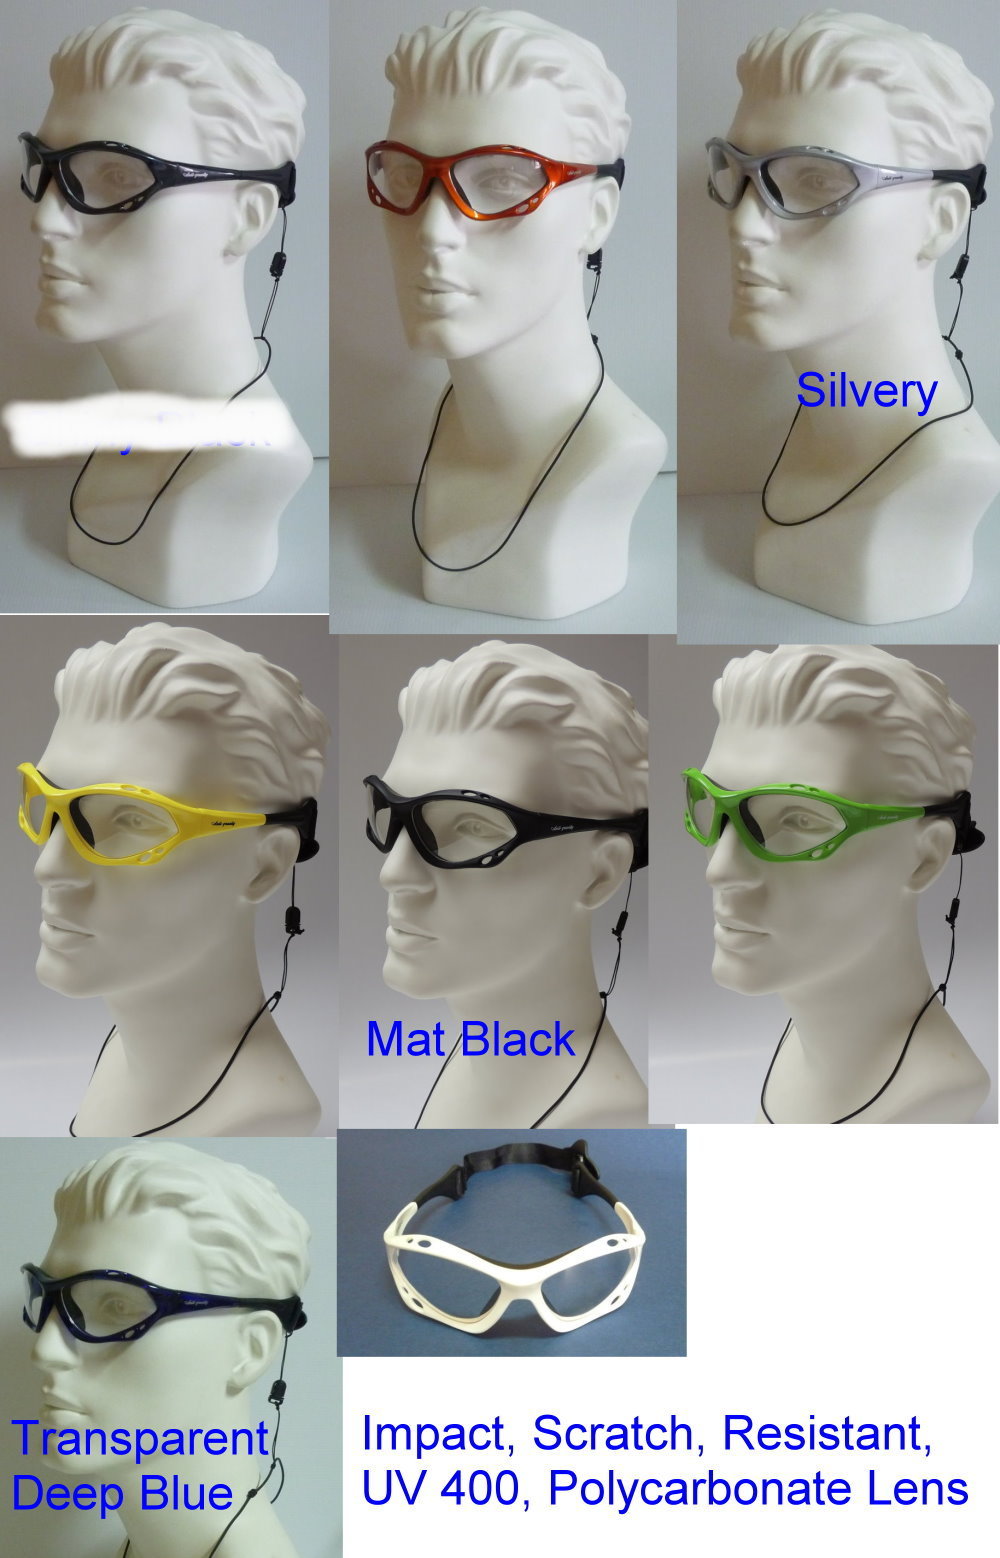 The glasses with clear lens